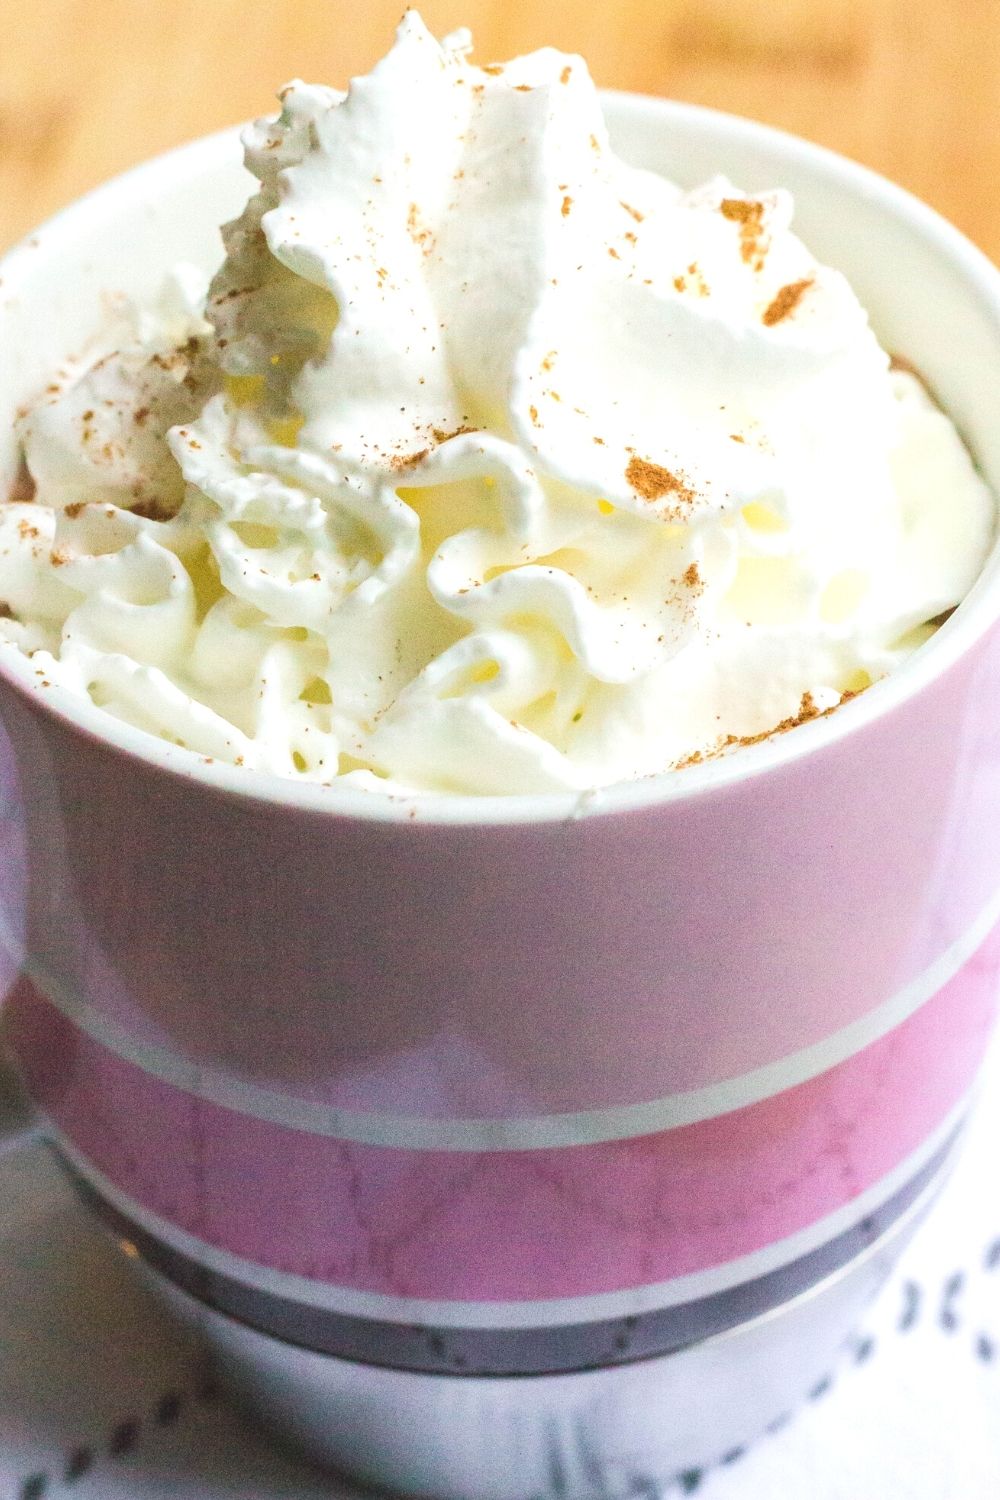 paris-style hot chocolate topped with whipped cream, served in a pink striped mug